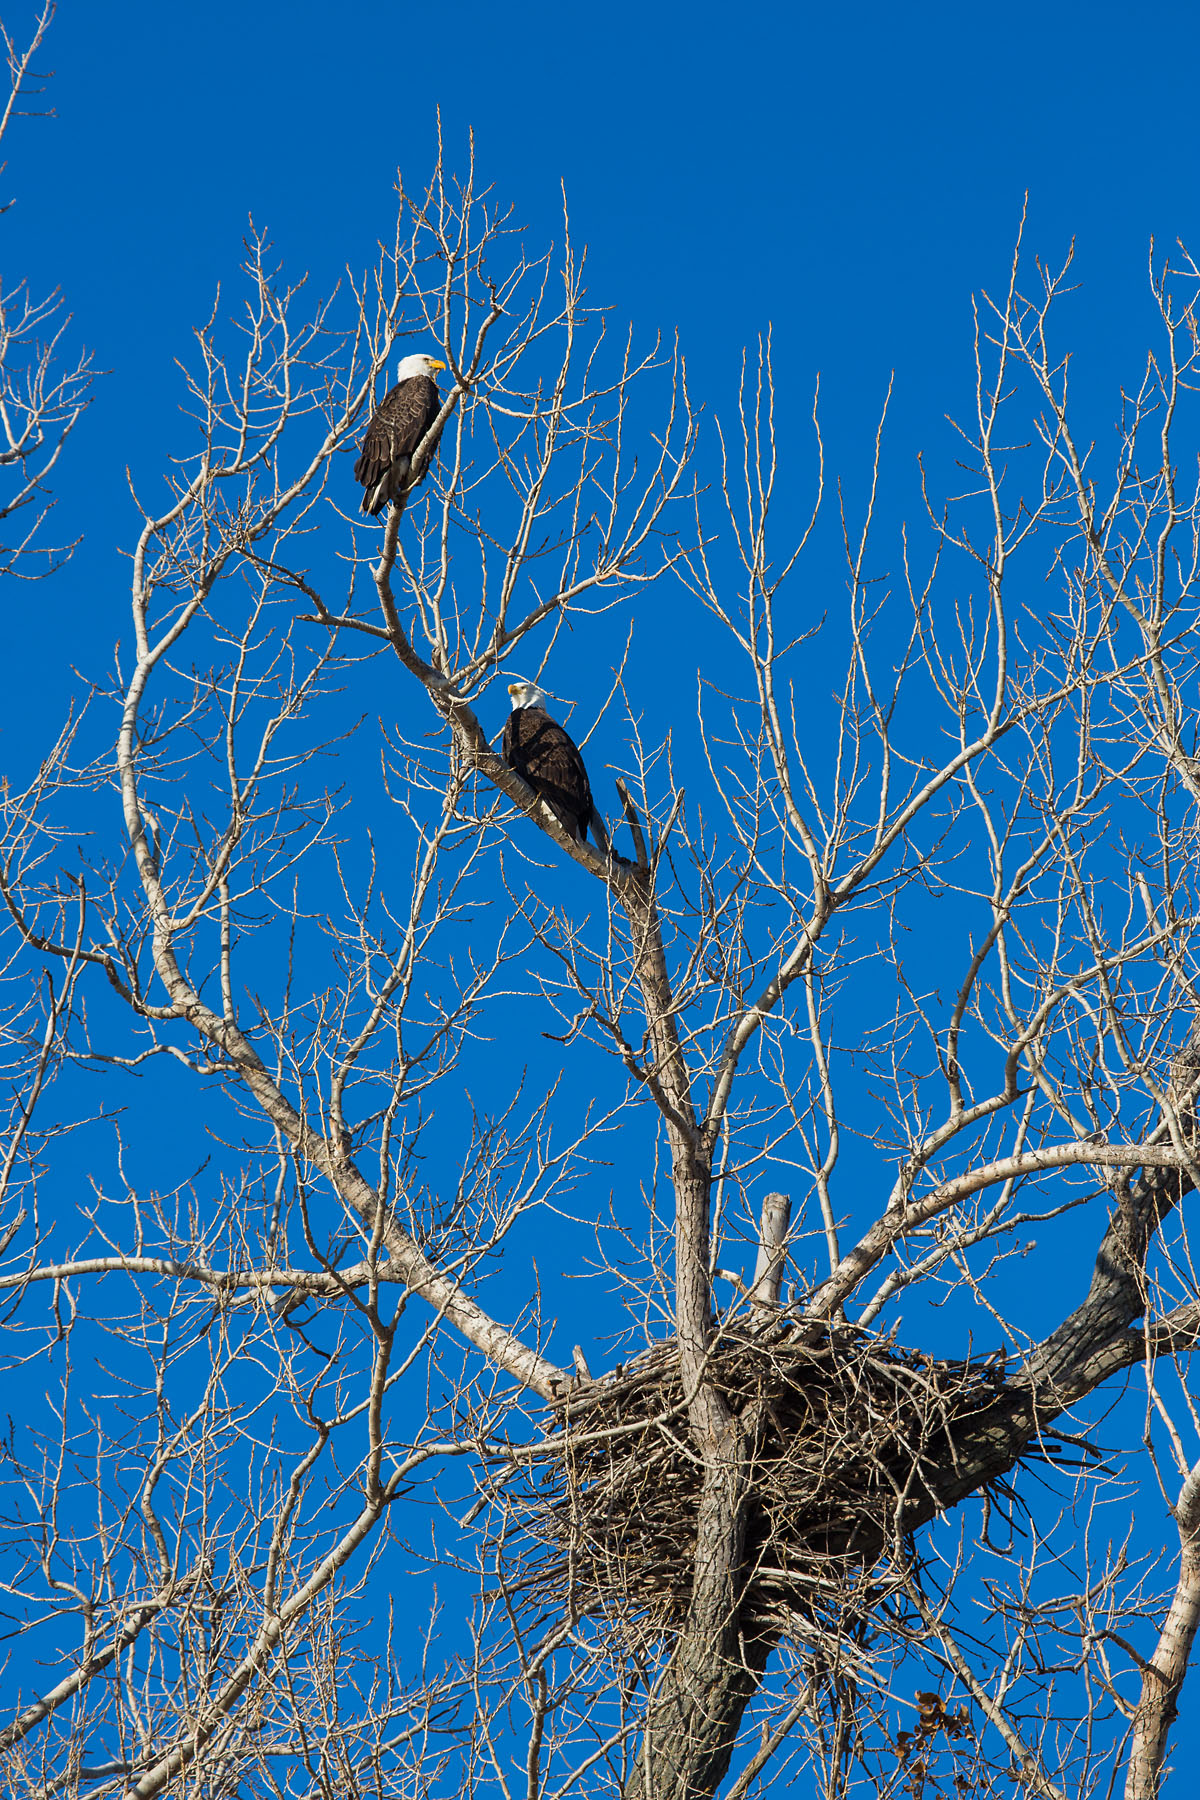 Bald Eagles near the nest, Loess Bluffs NWR, December 2019.  Click for next photo.